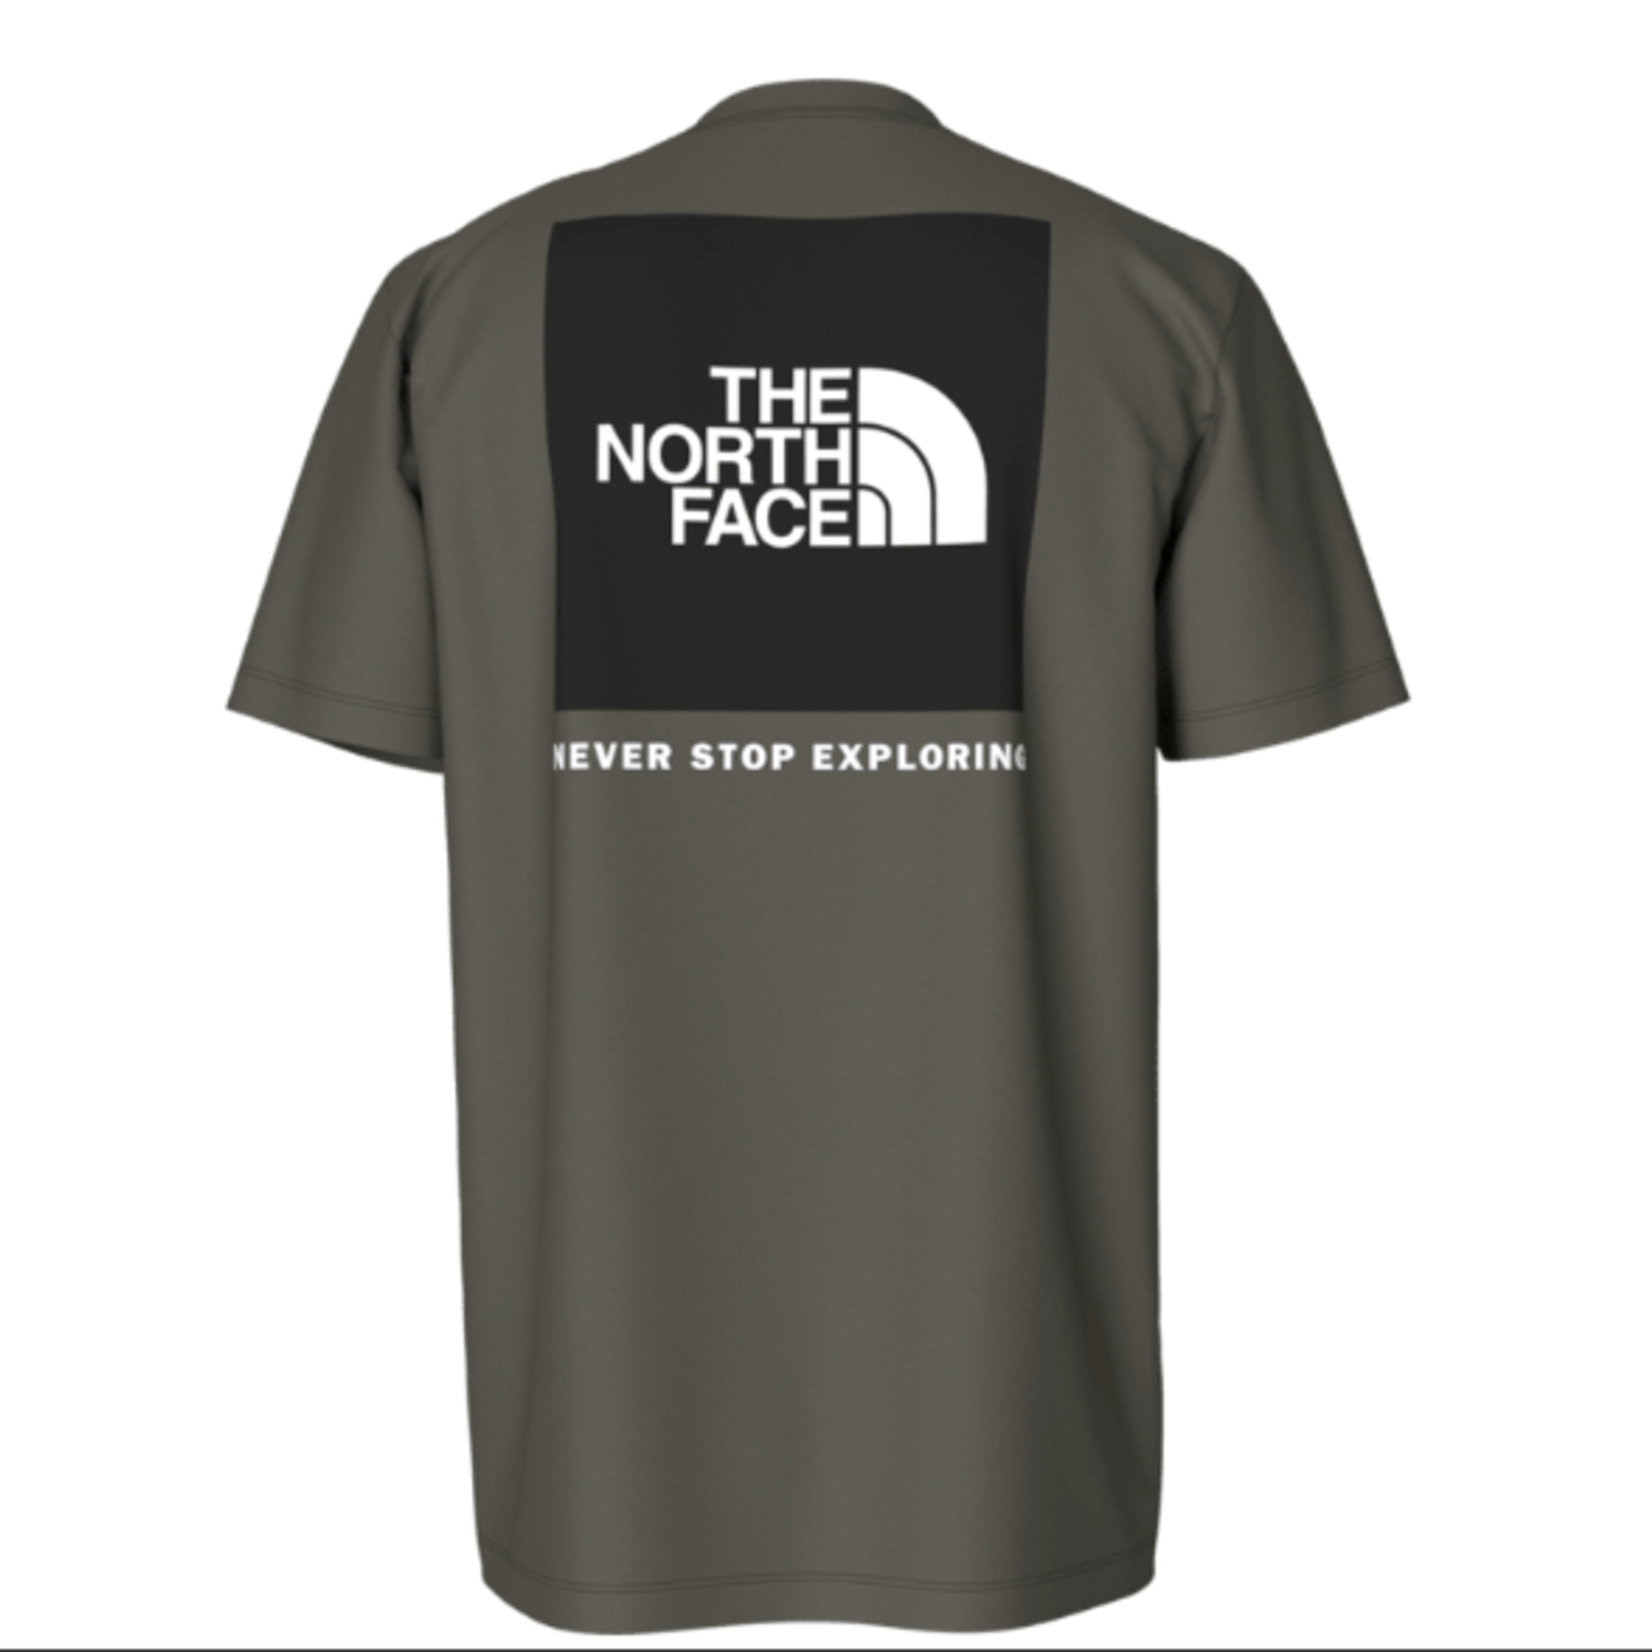 The North Face The North Face T-Shirt, S/S Box NSE Tee, Mens